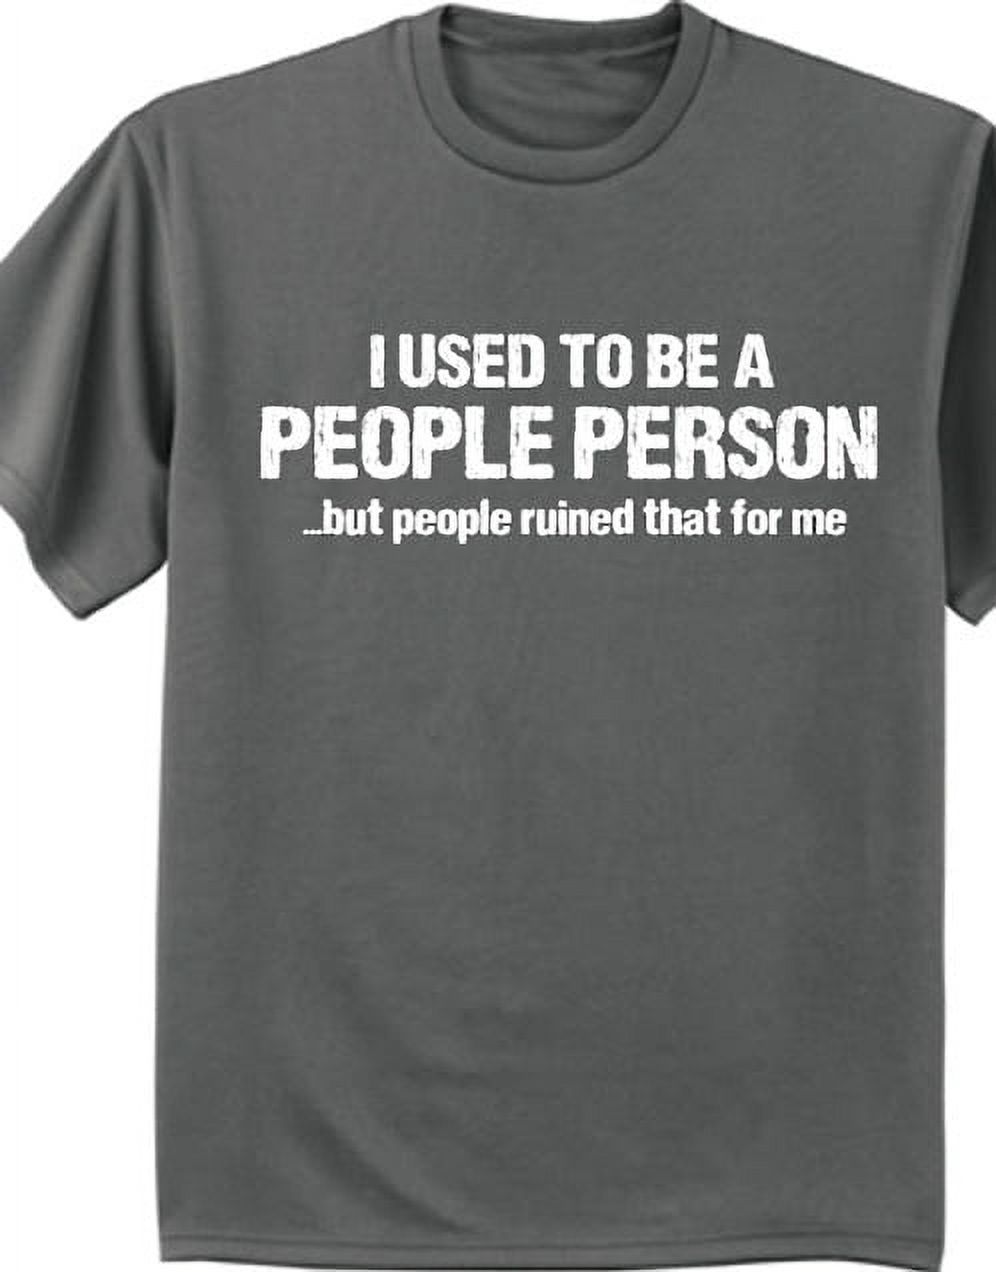 Not a people person funny t-shirt graphic tee for men - image 2 of 2